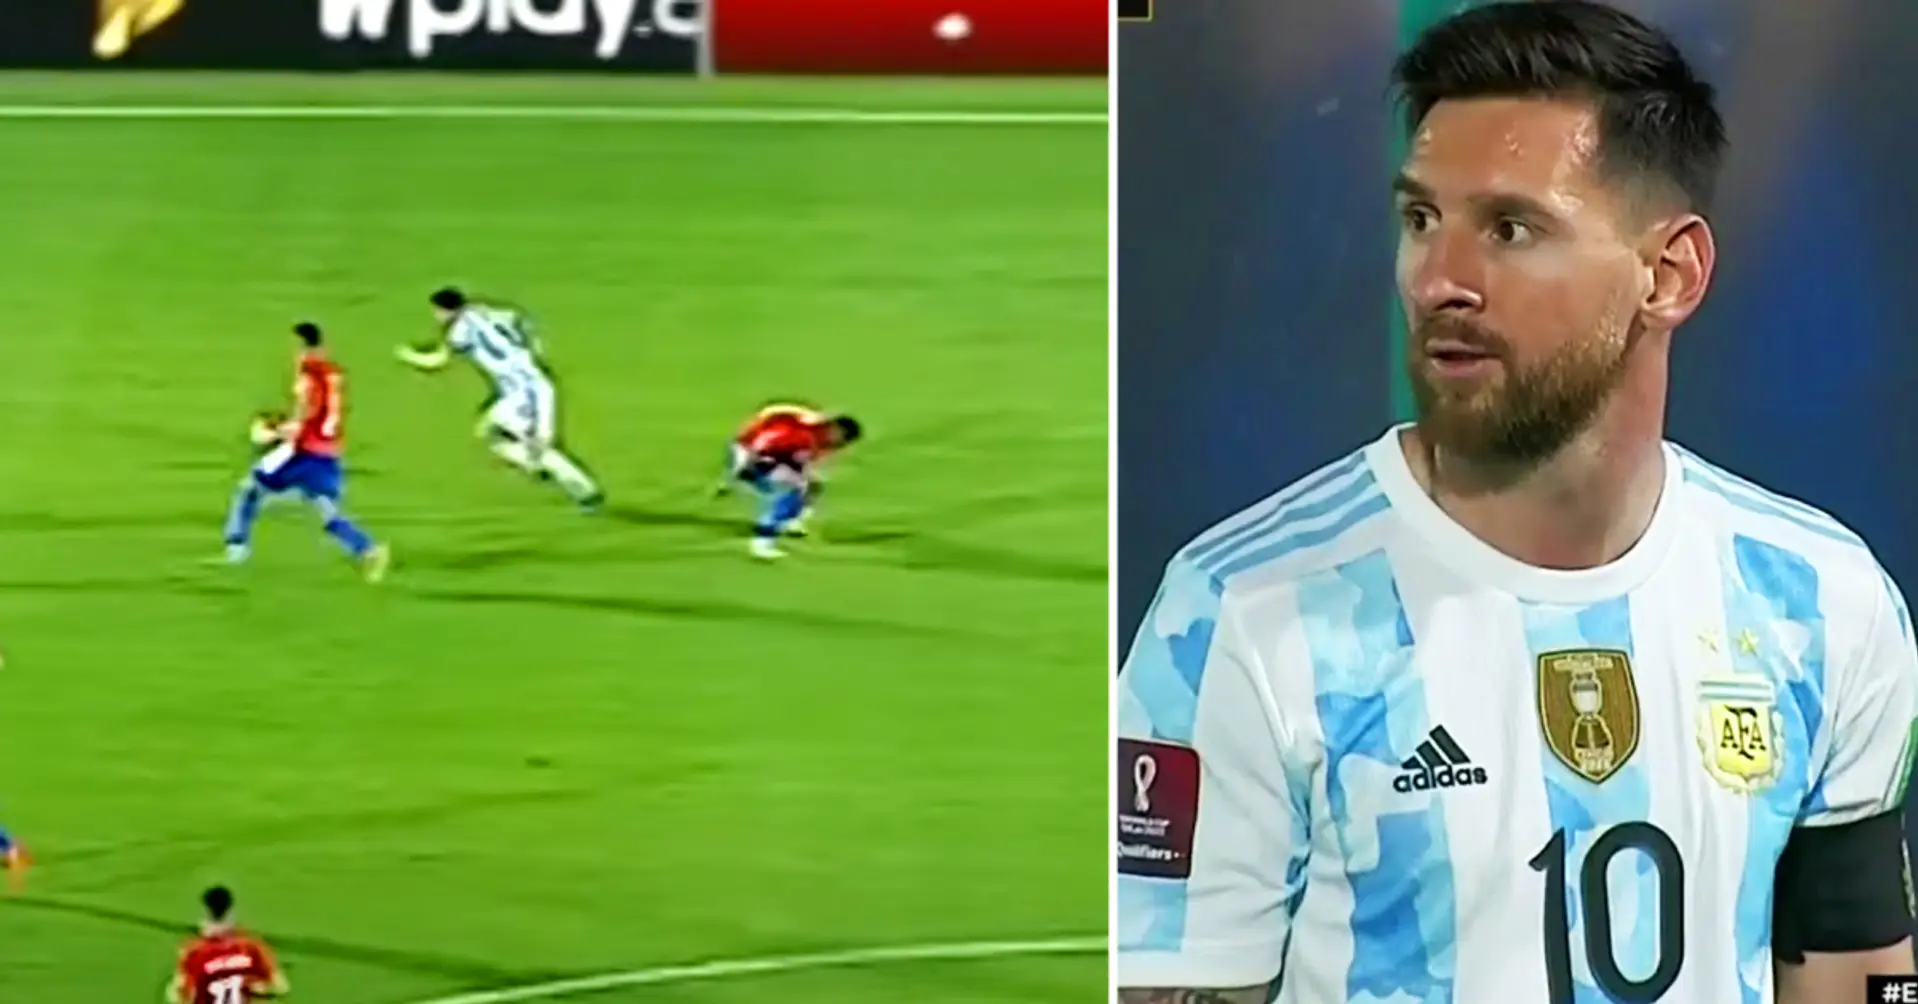 Leo Messi slaloms past Paraguay defender, he doesn’t even realize what happened